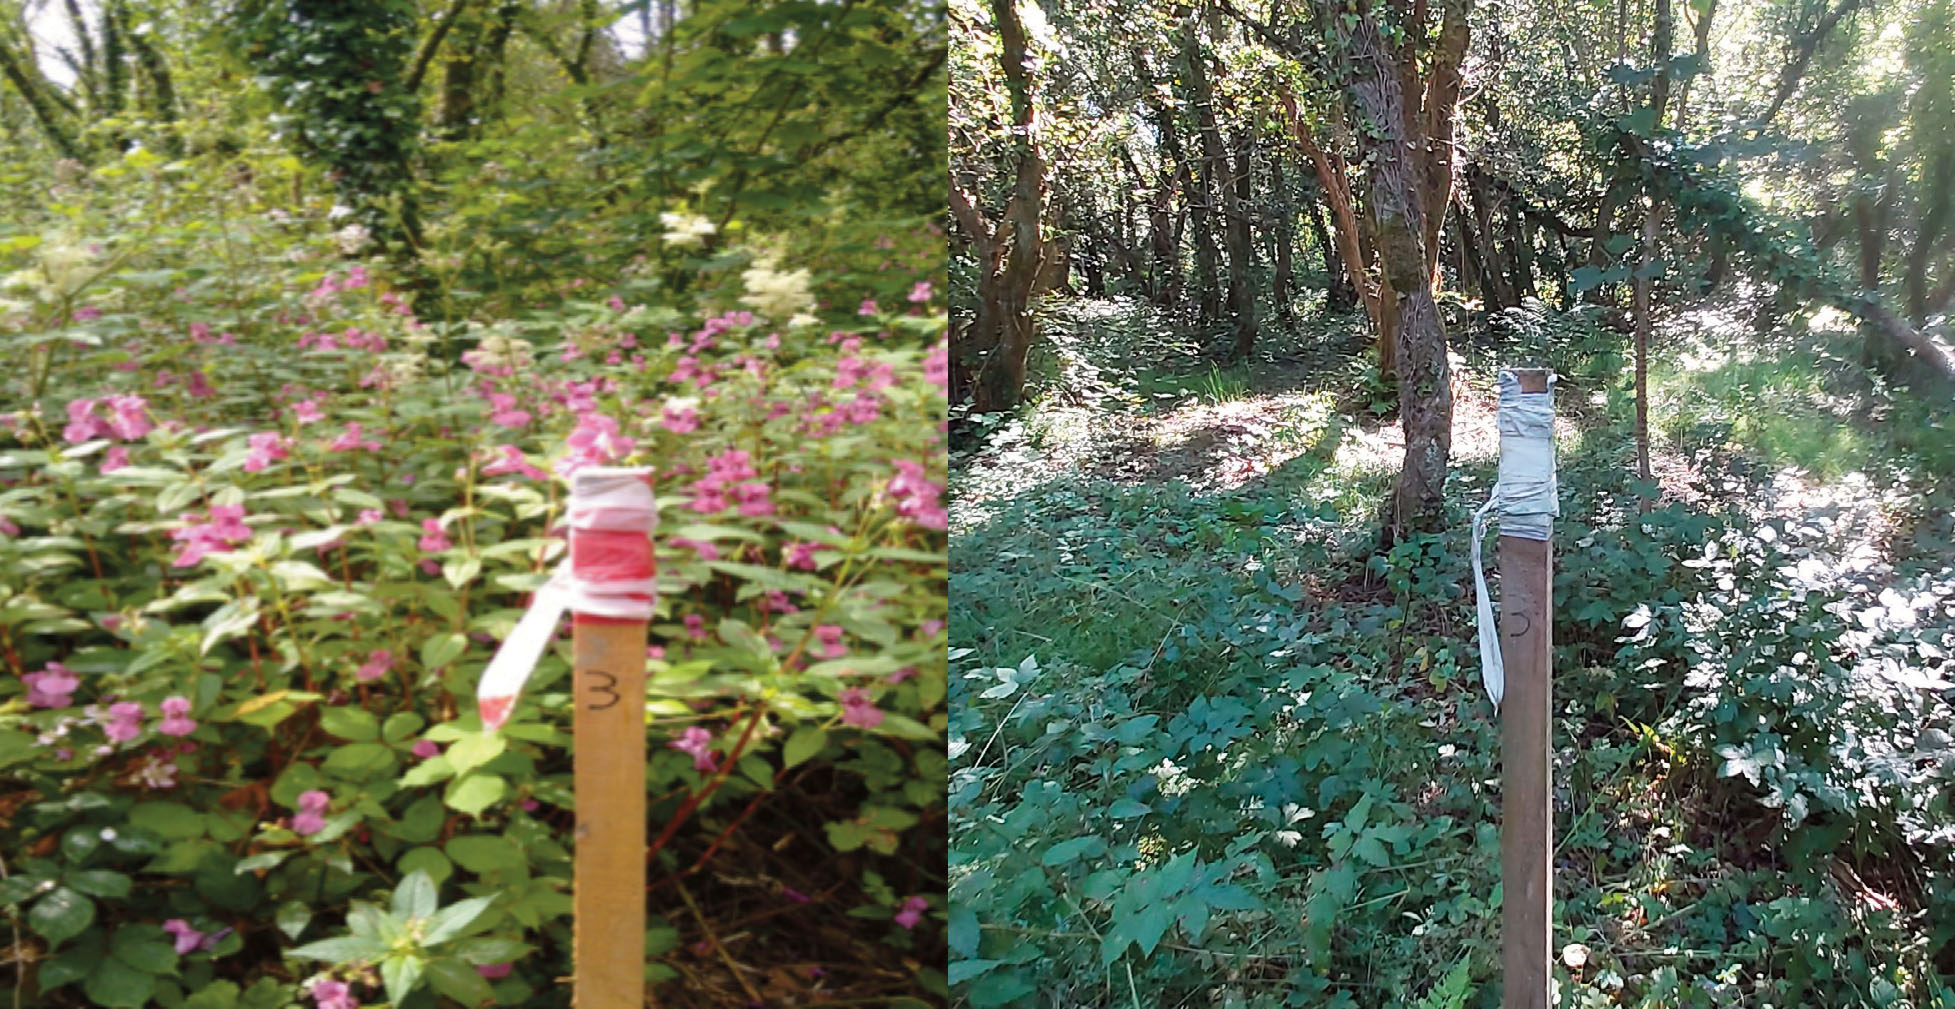 Two images side by side showing the difference between July 2019 and August 2021 on a fixed point where Himalayan balsam removal has taken place